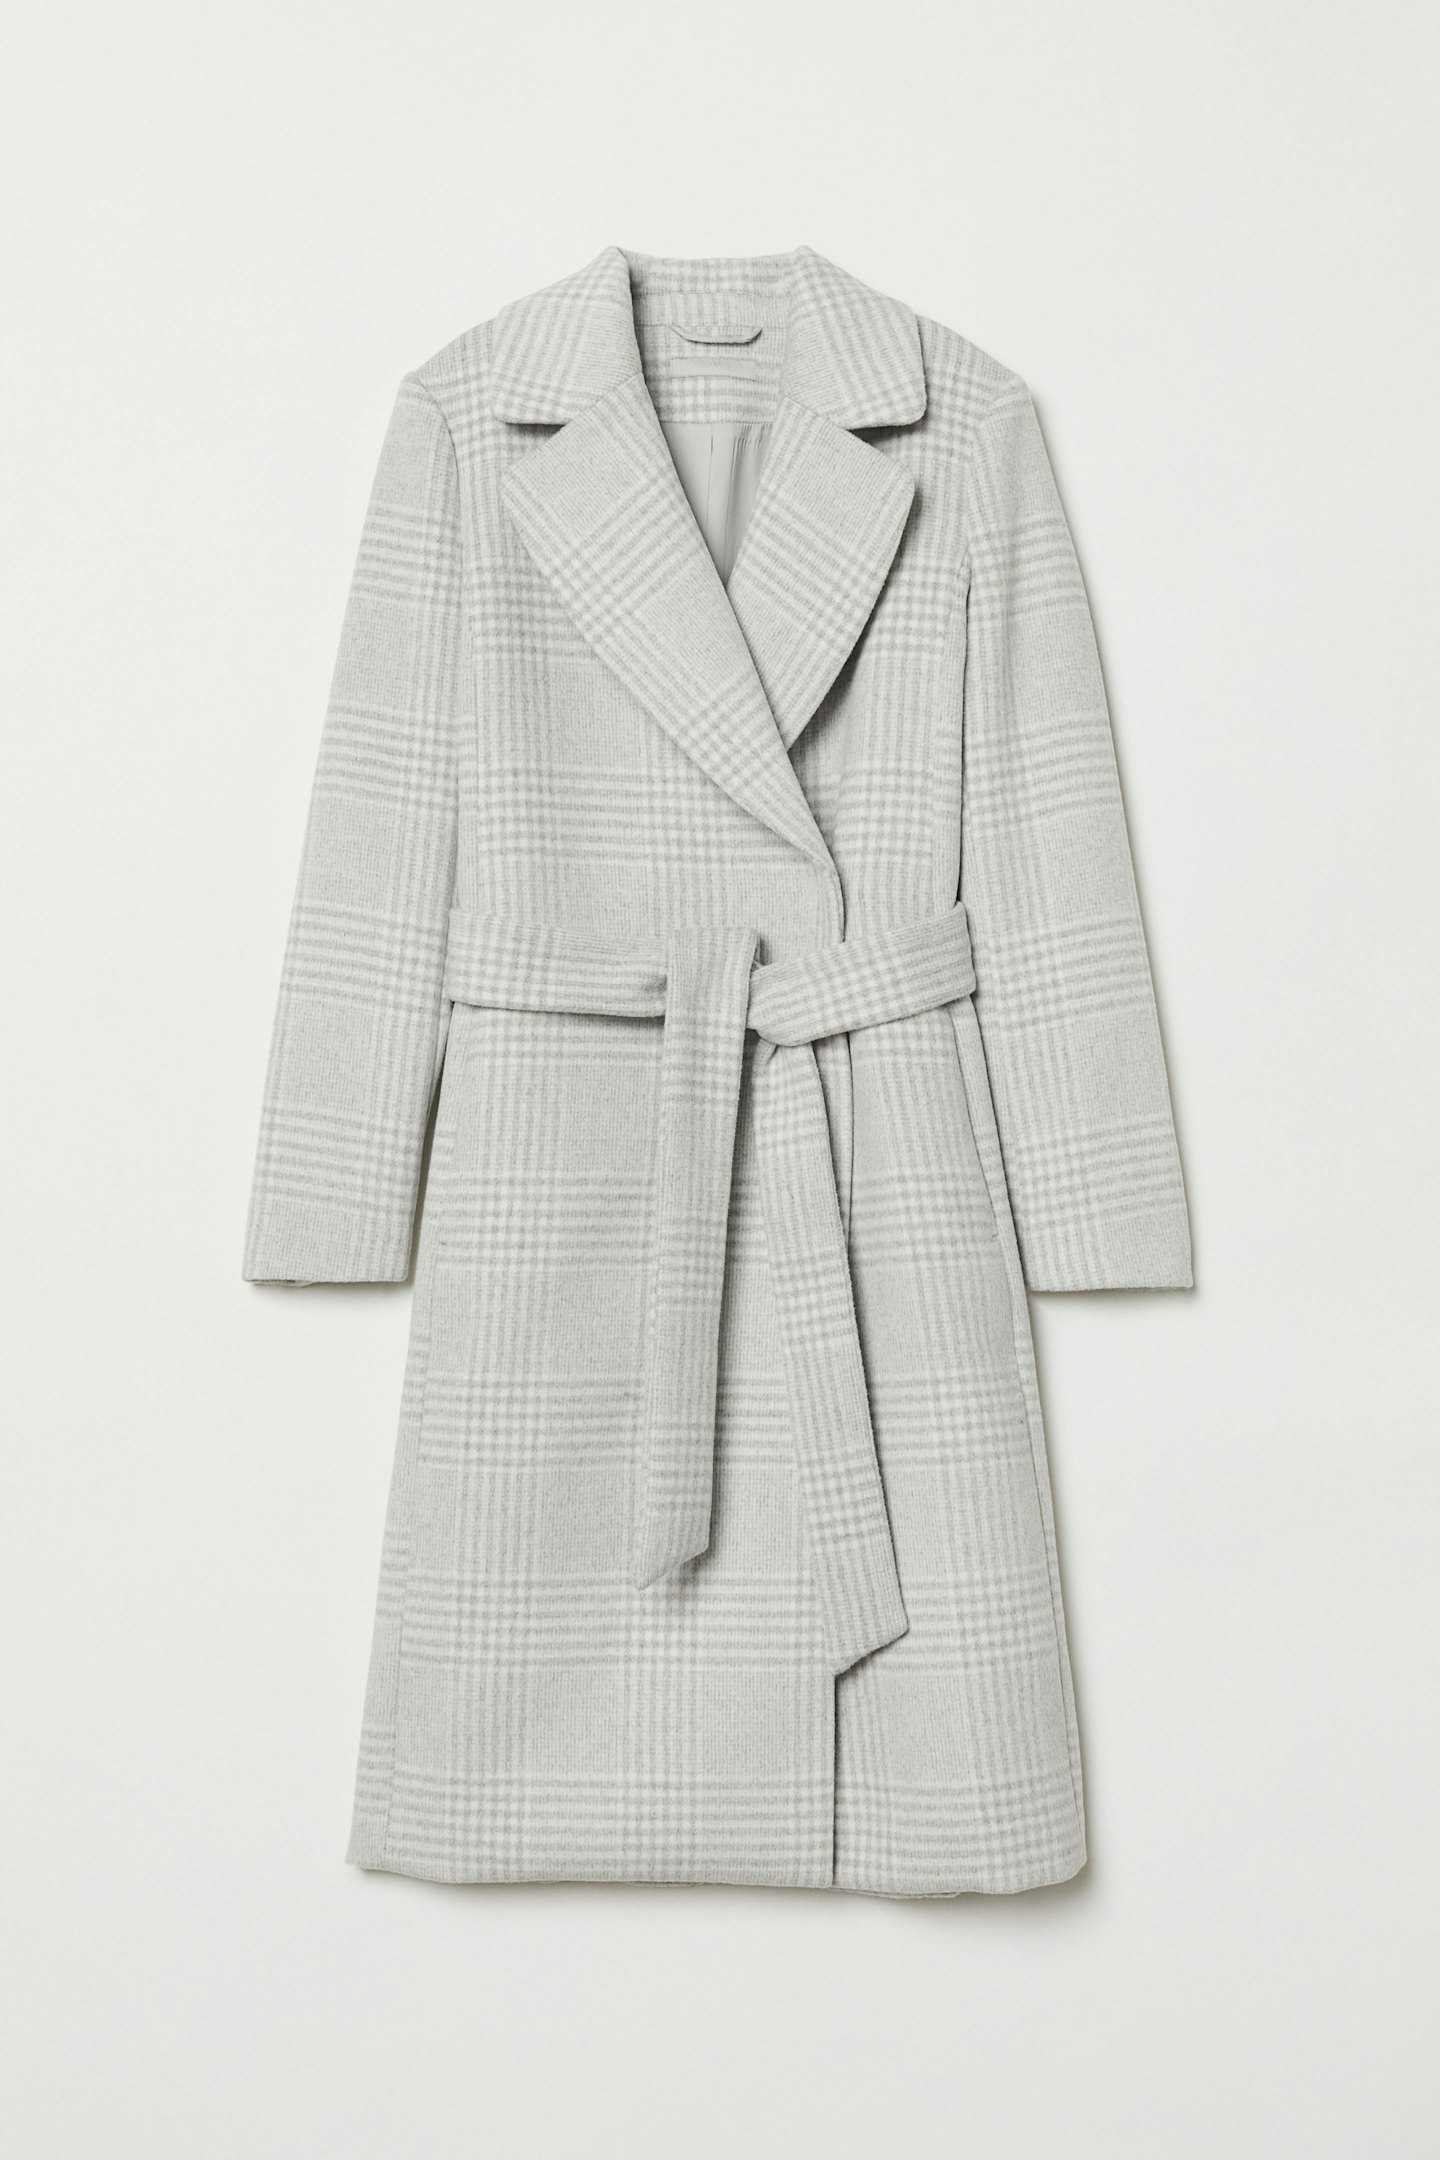 The Only 4 Coat Trends To Care About | %%channel_name%%